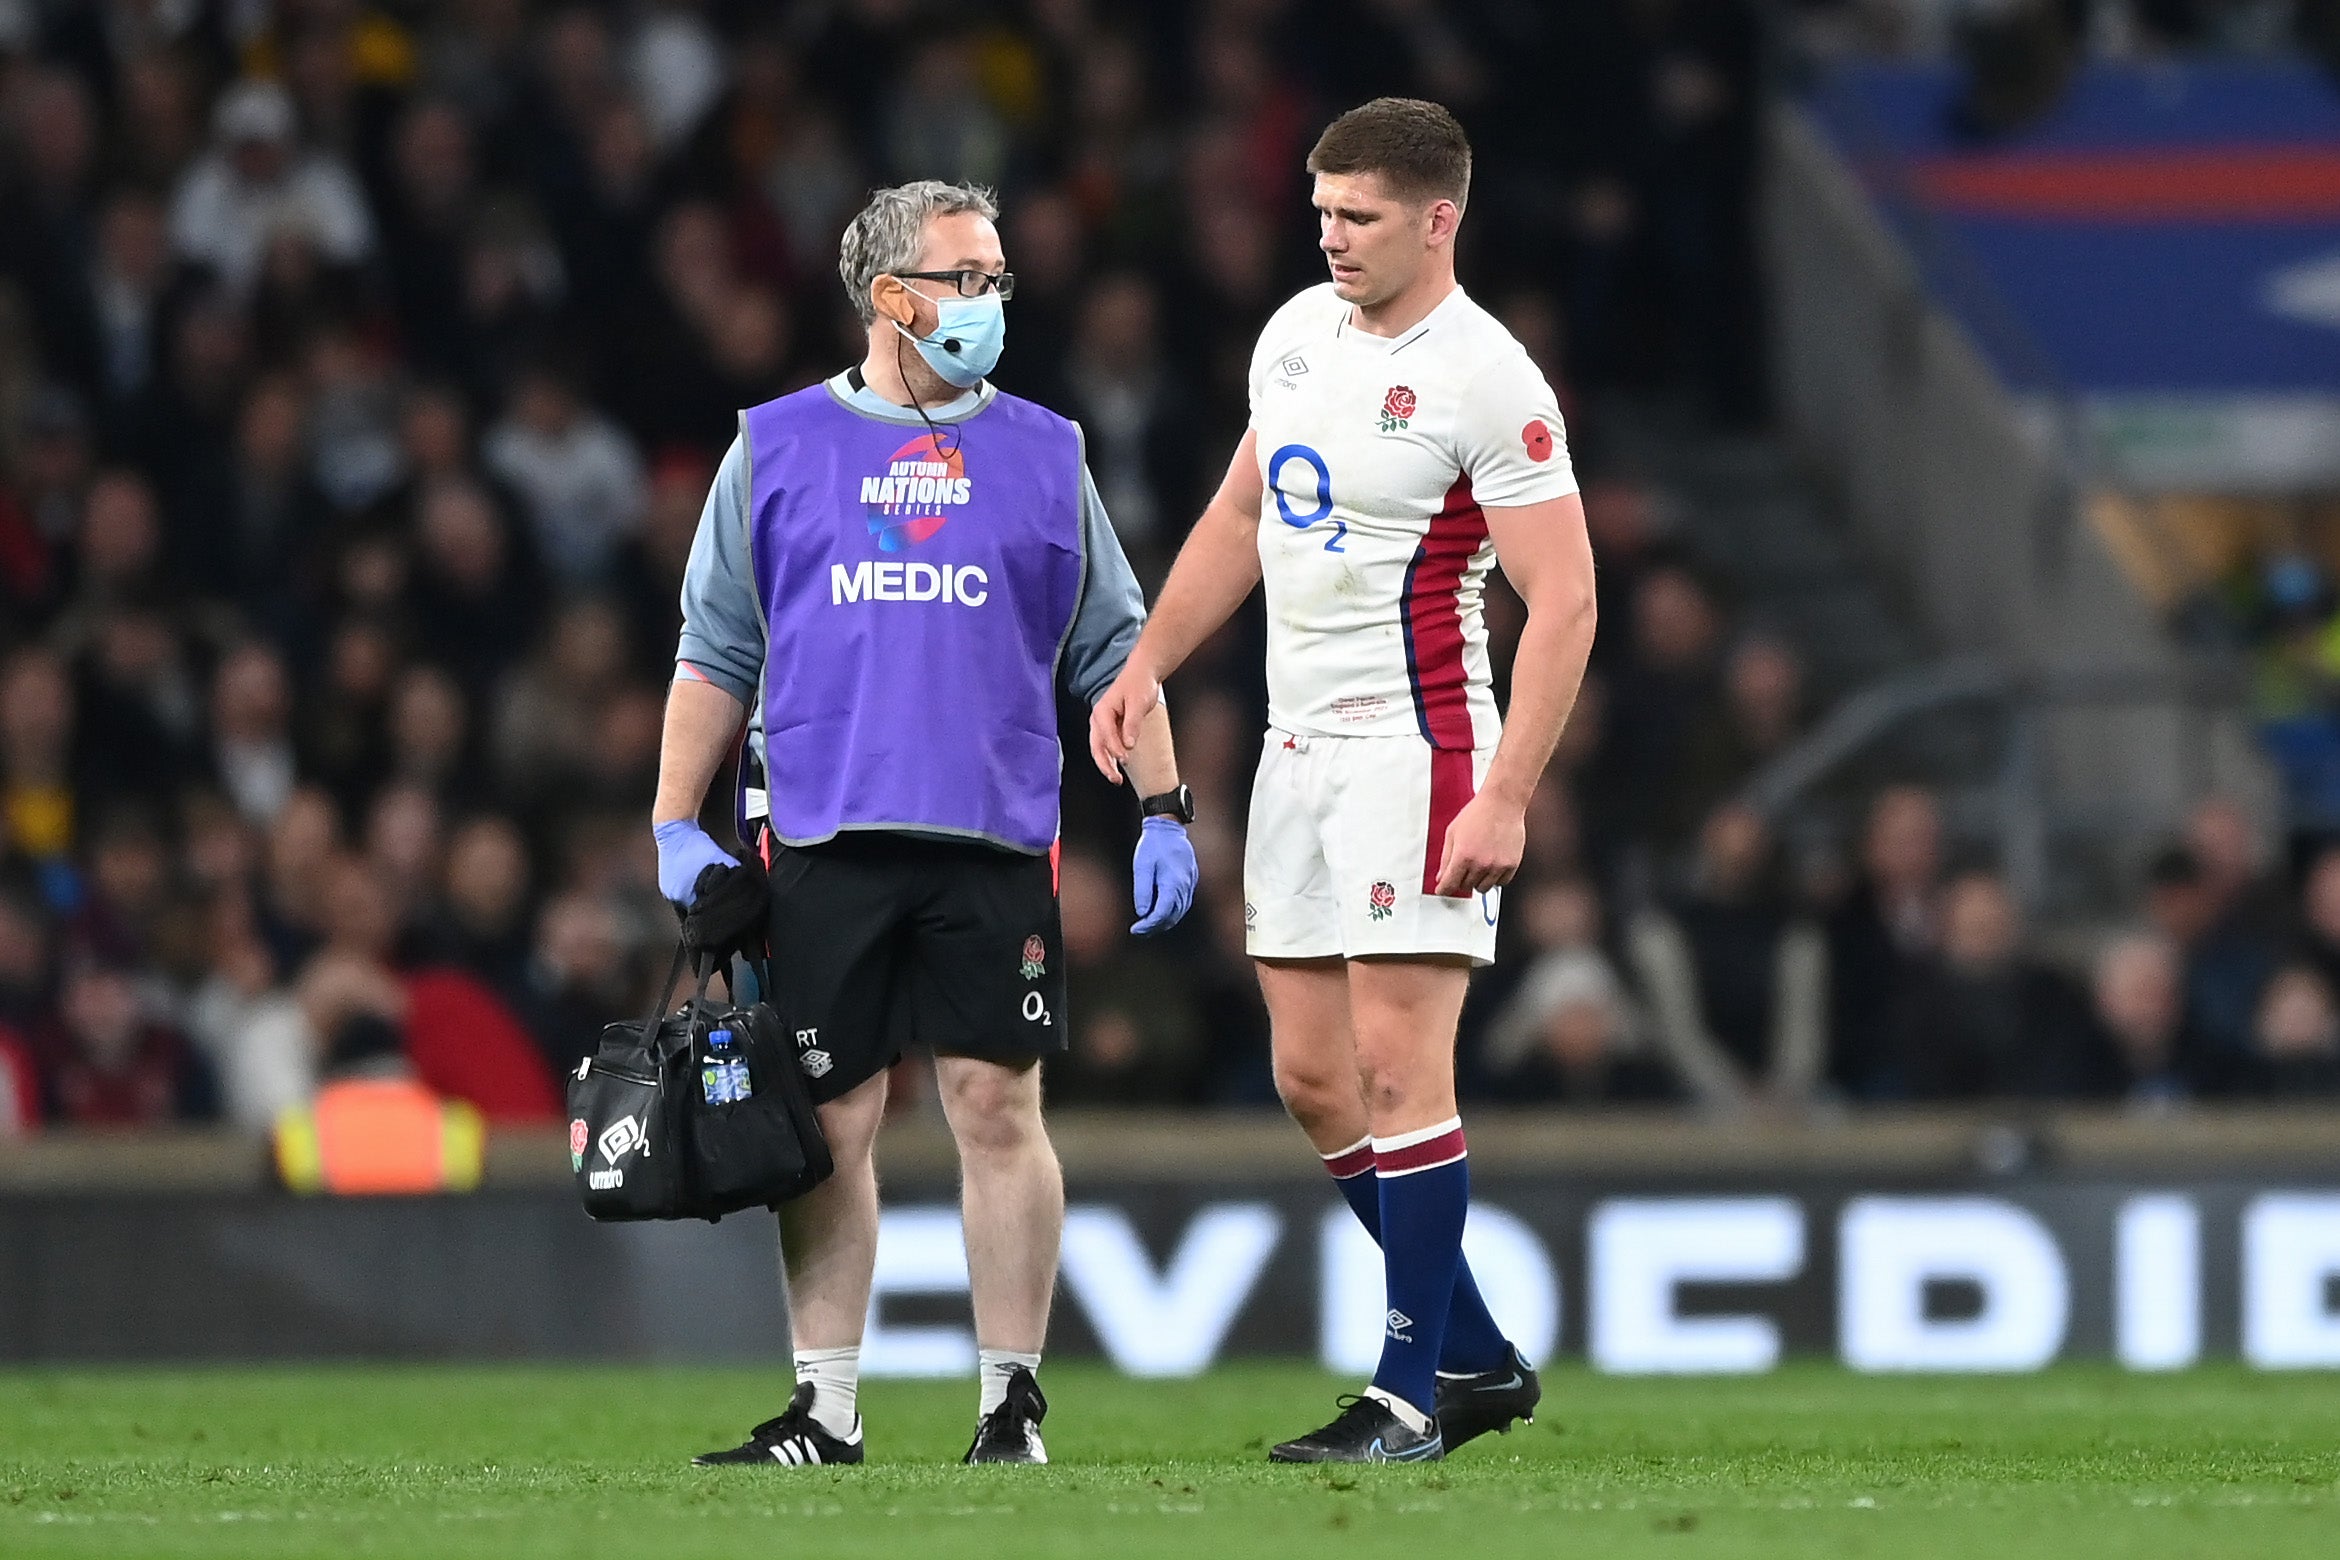 Captain Farrell is out of Saturday’s match at Twickenham